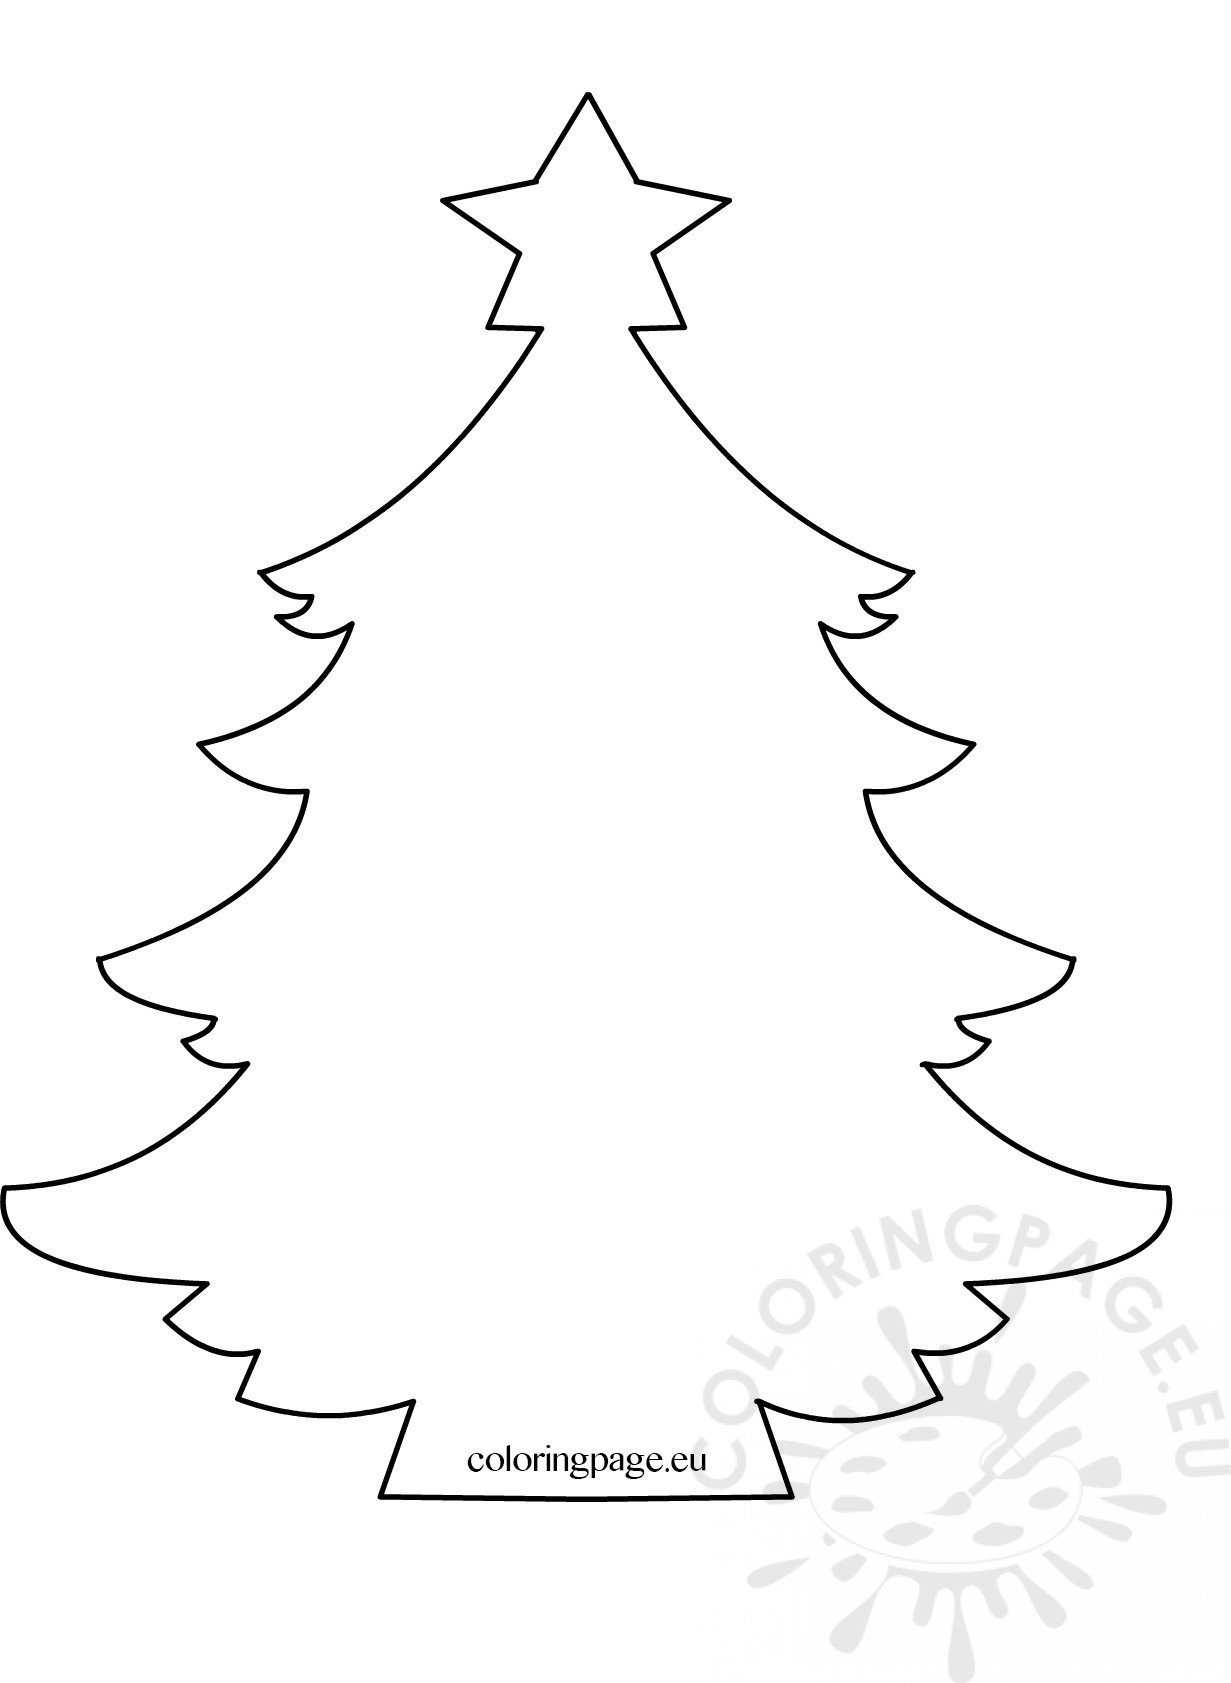 Christmas tree with star template Coloring Page